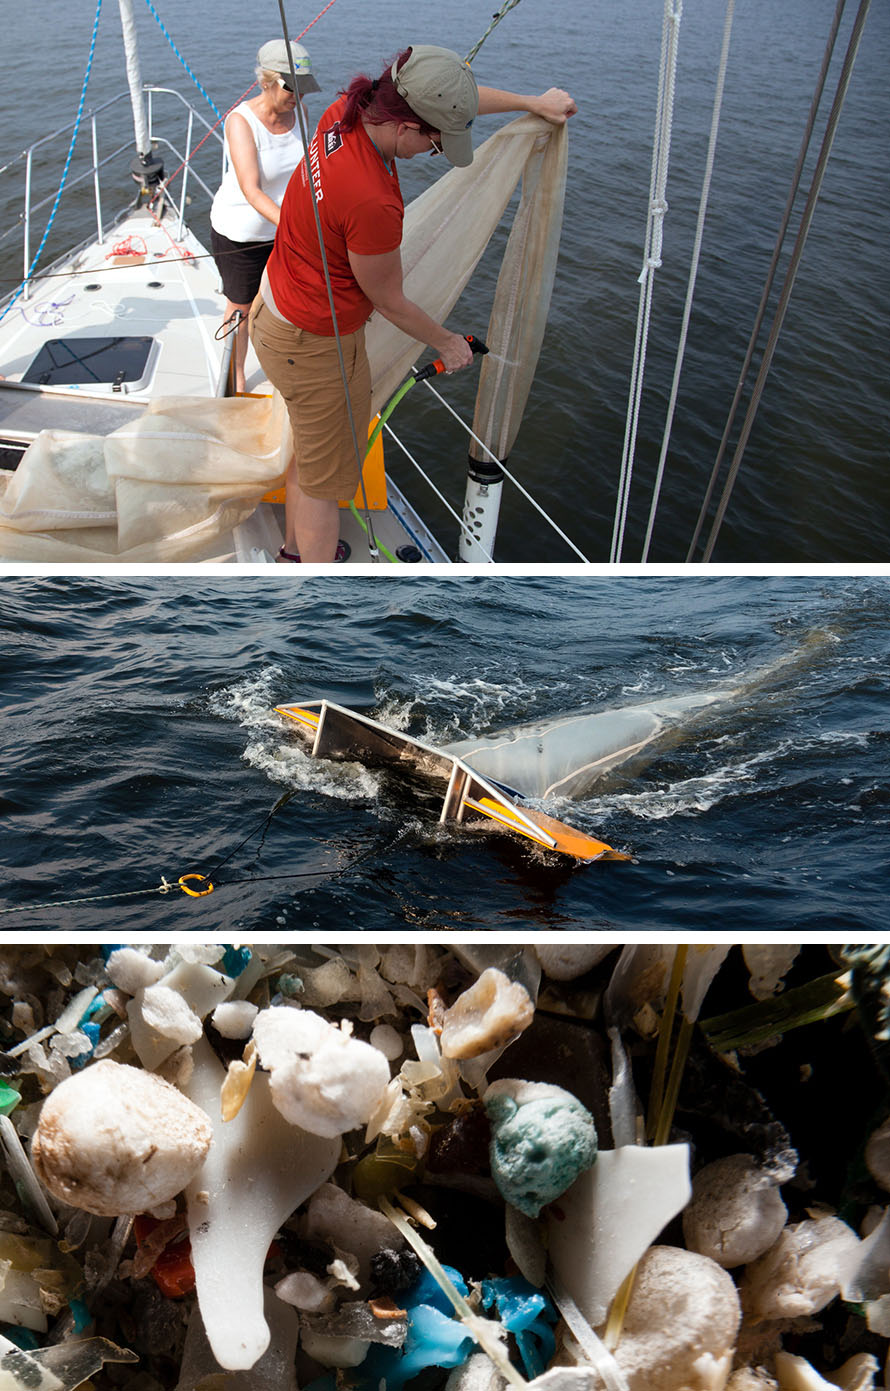 Images of Julie Lawson, and Elvia Thompson, a trolling basket being dragged on the surface of the Chesapeake Bay, and a closeup image of tiny plastics that have been recovered from the cleanup.